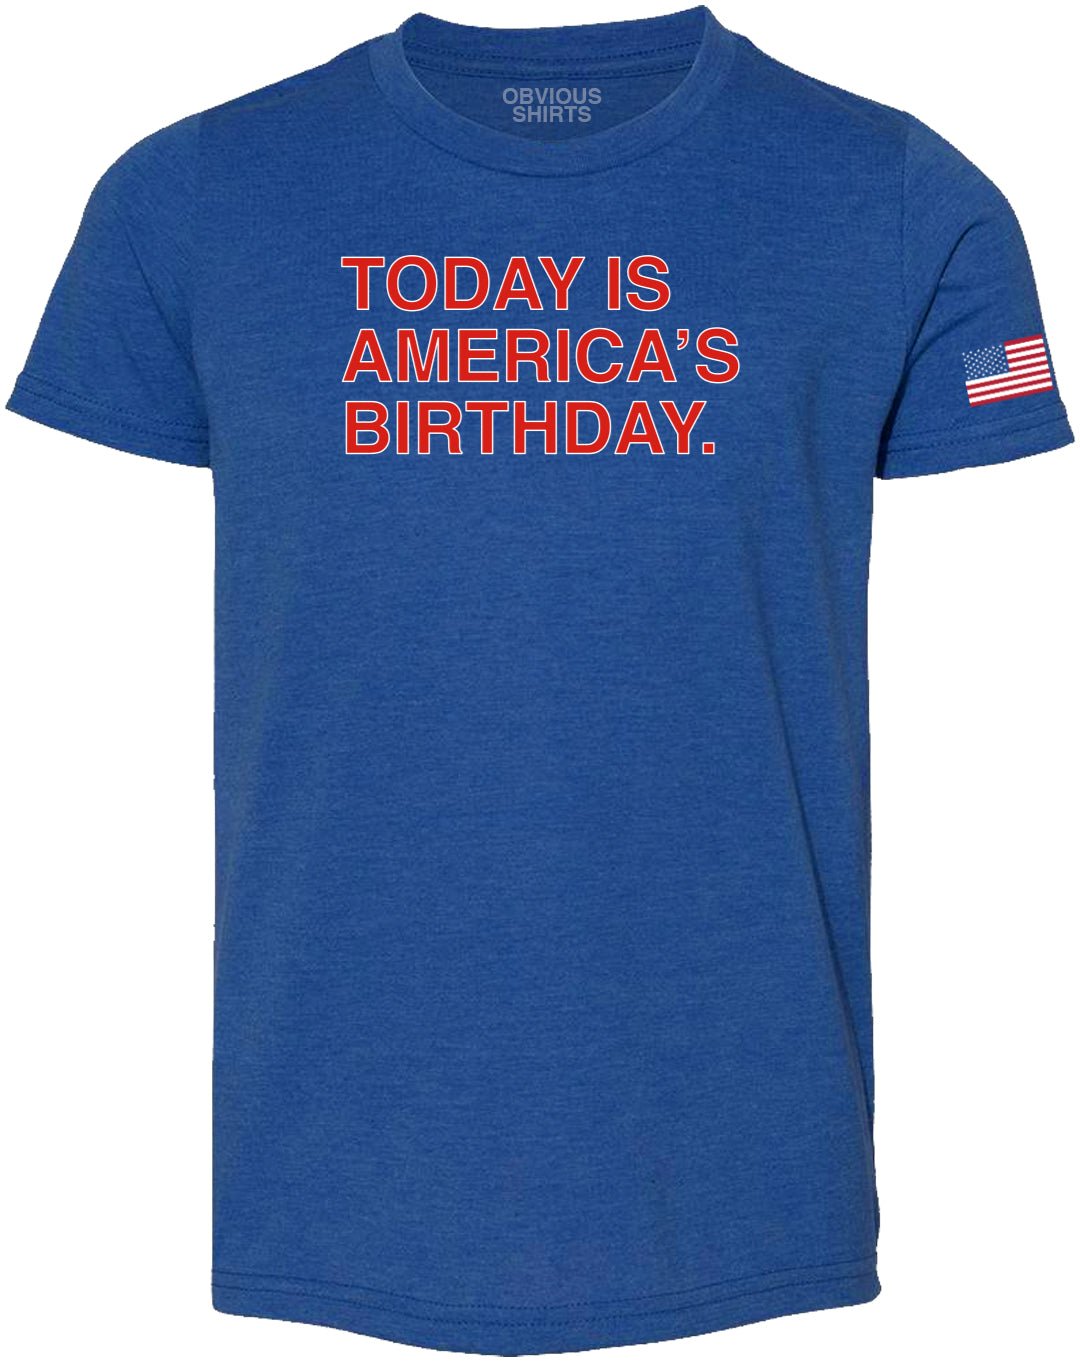 TODAY IS AMERICA'S BIRTHDAY. (YOUTH) - OBVIOUS SHIRTS